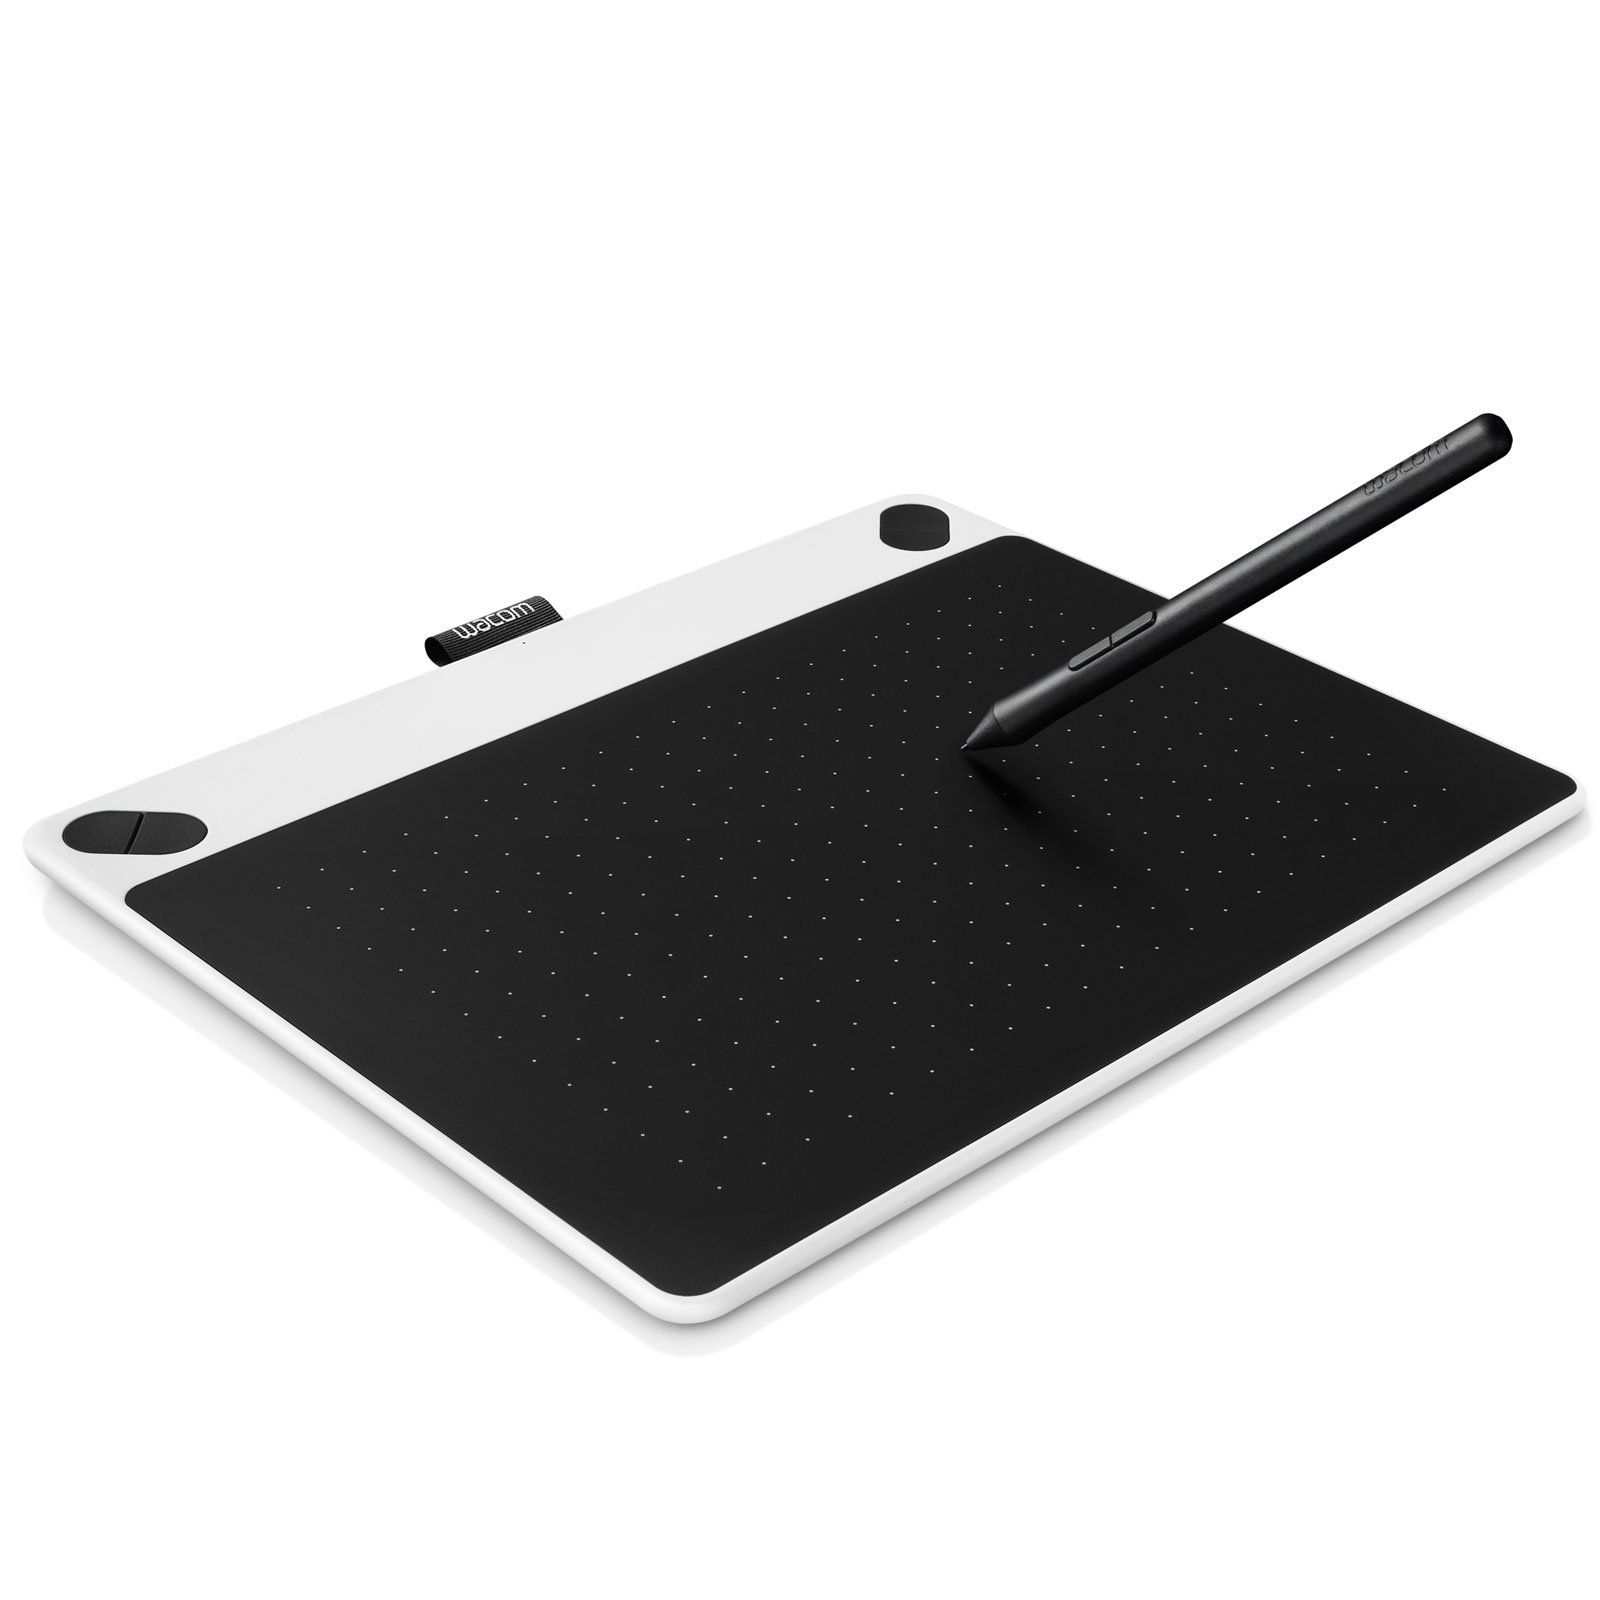 Intuos Draw Small Blanc Tablette graphique sur